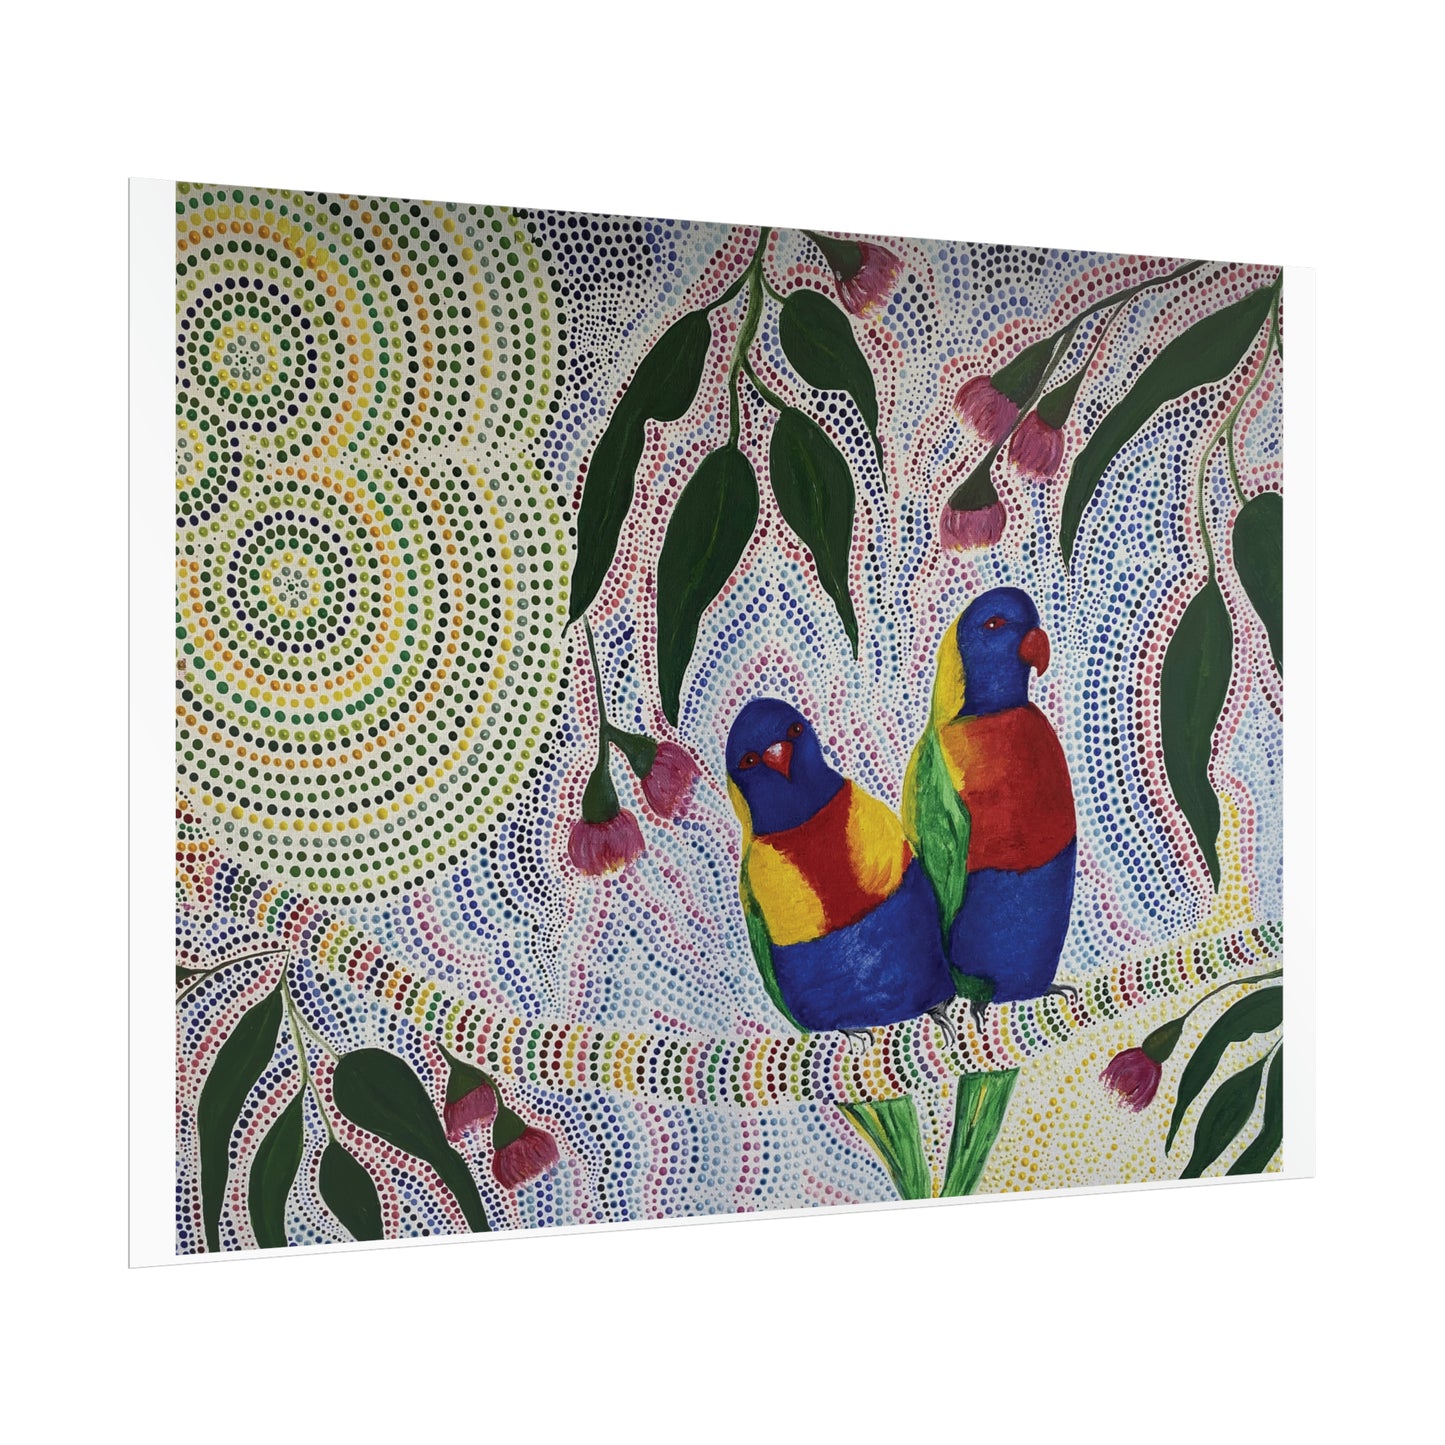 Two Rosellas in a Gum Tree Artist Kim's Dot Paintings Rolled Poster